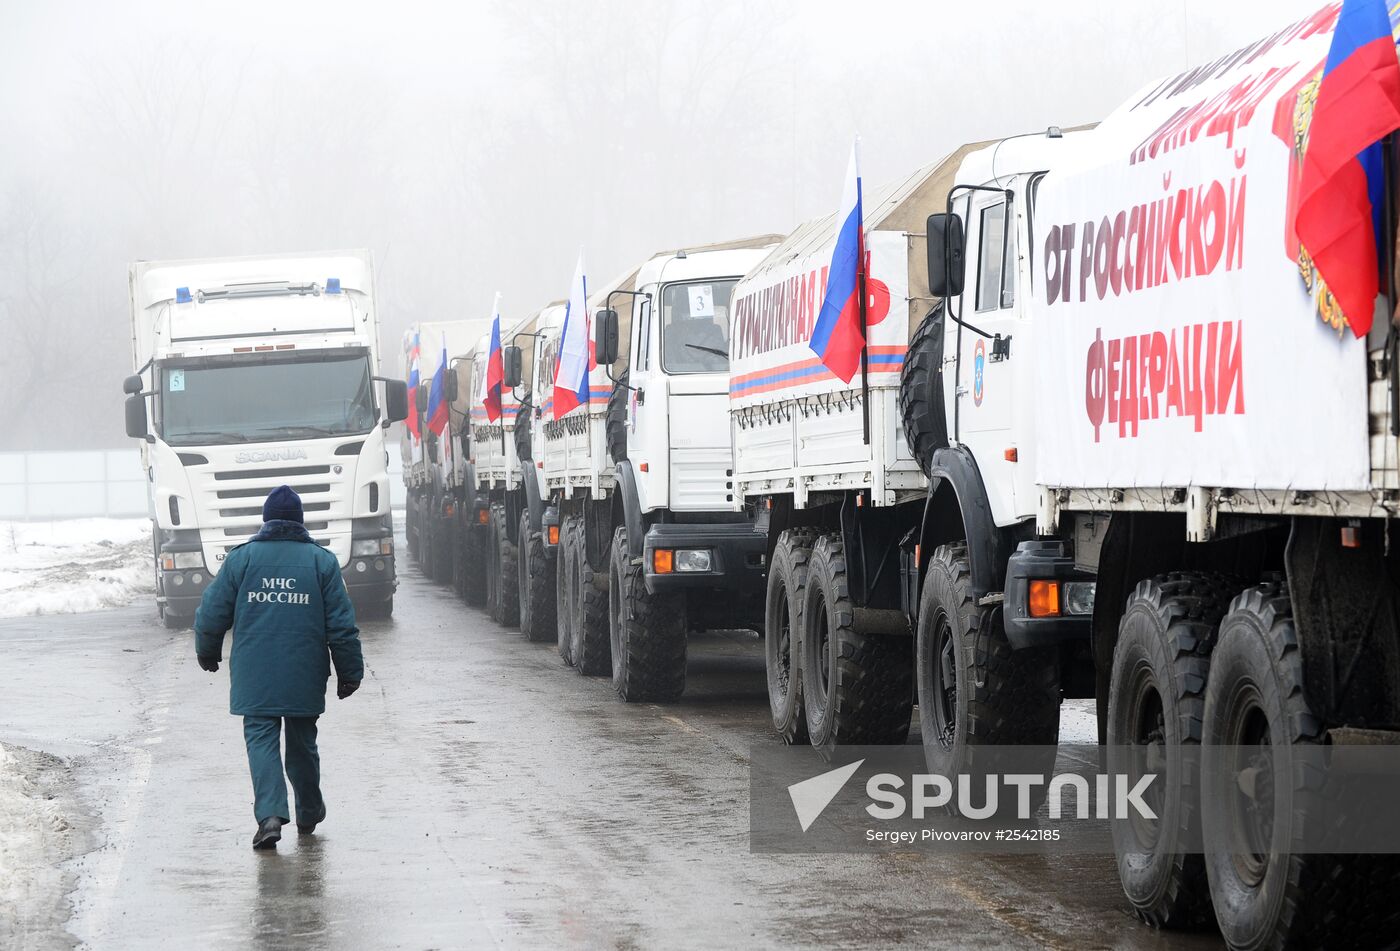 Ninth humanitarian aid convoy for Donbas formed in Rostov Region